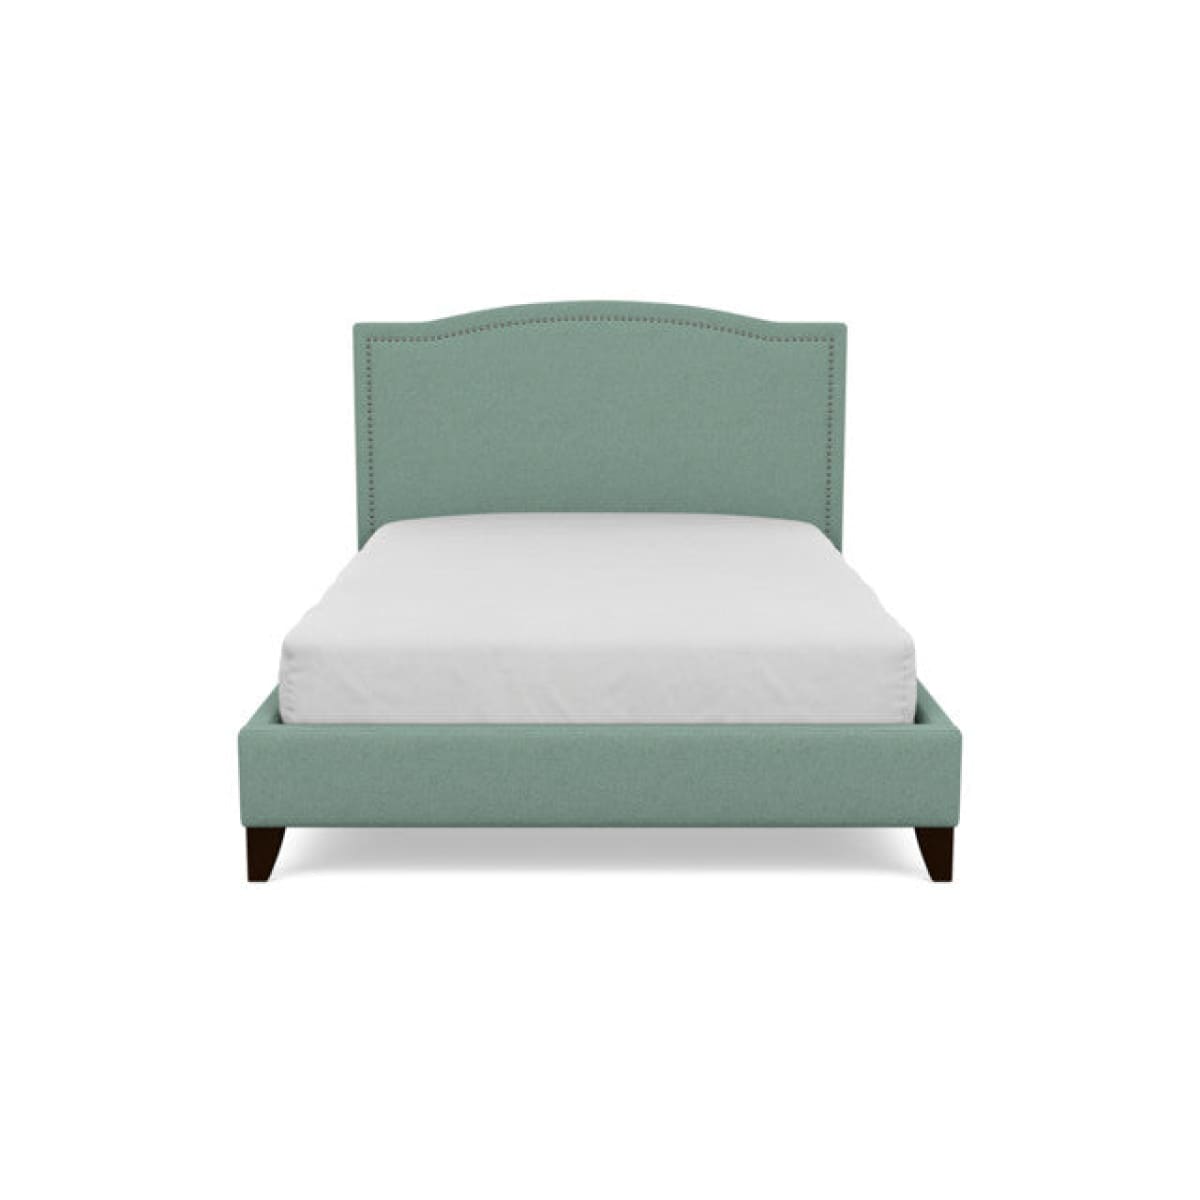 Else Custom Made To Order Canadian Made Fabric Upholstery Bed - $1599.99 - BED